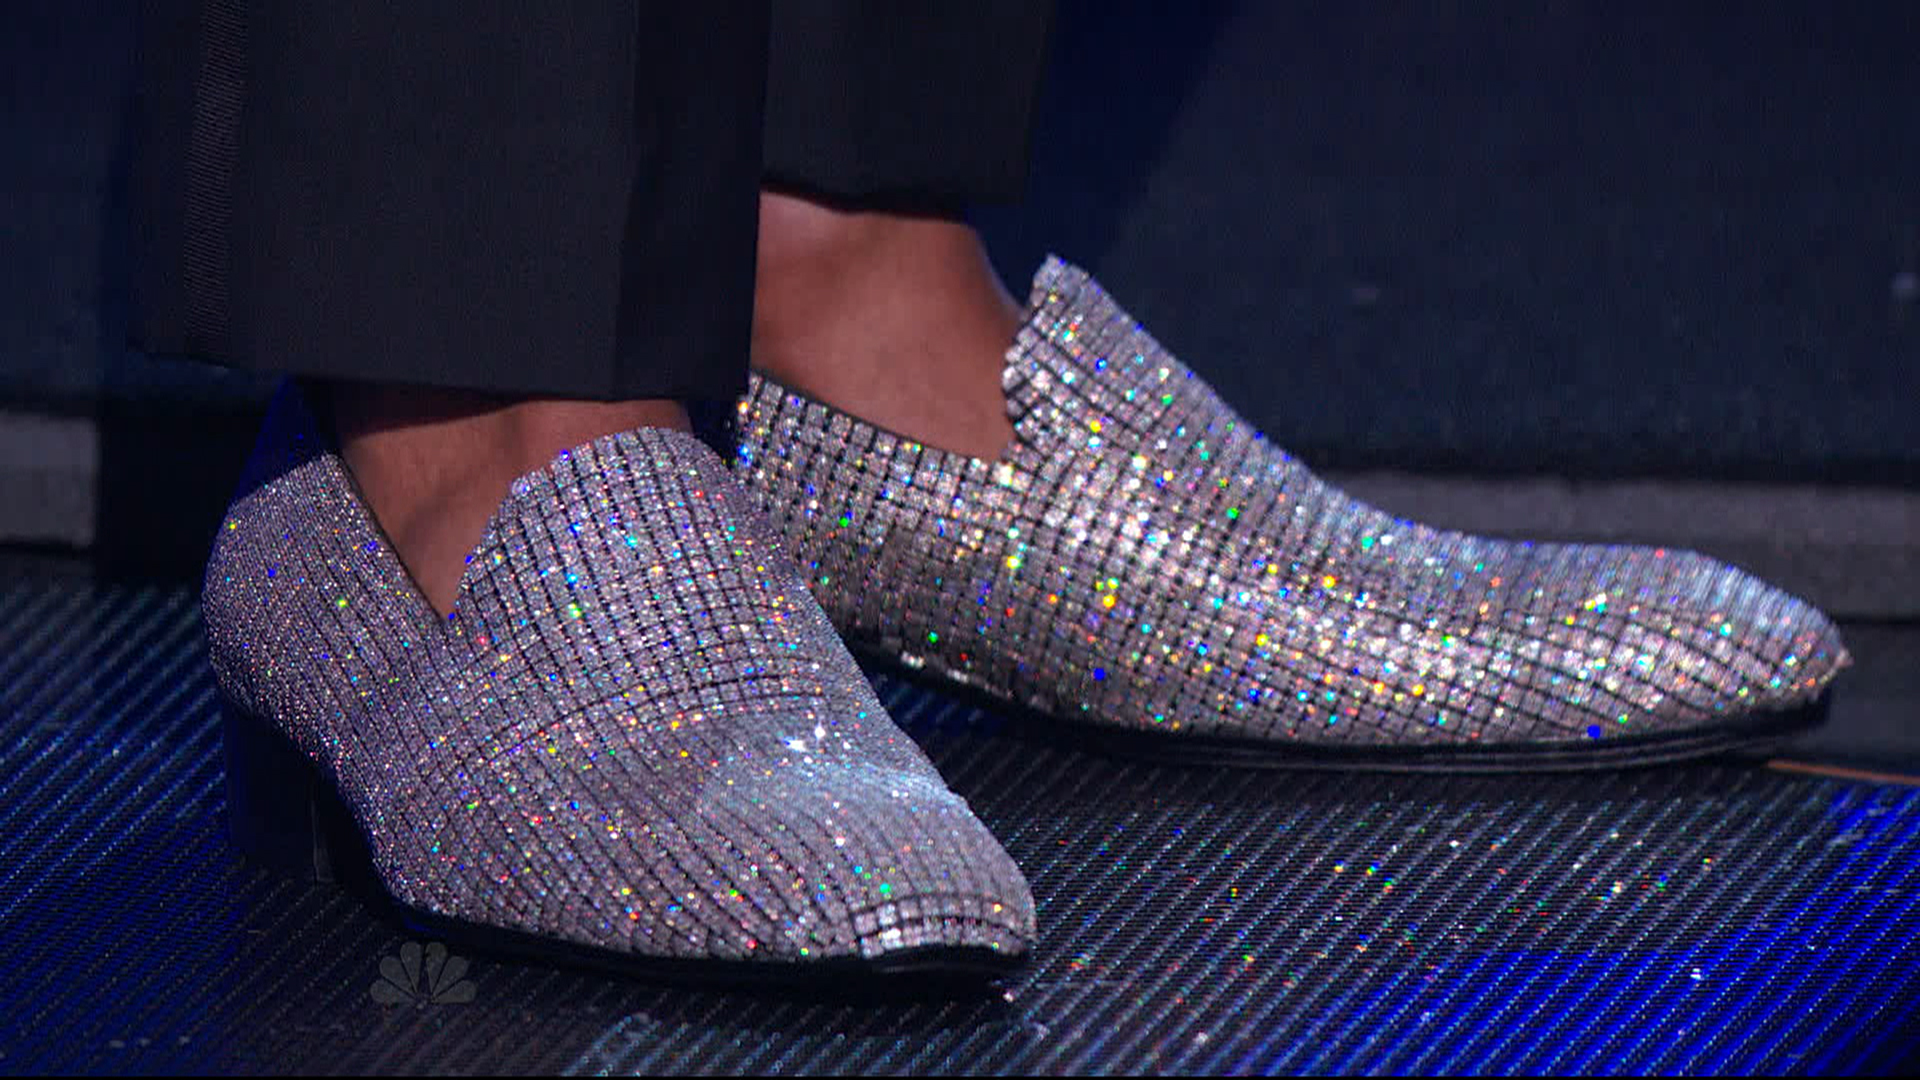 Nick Cannon sports $2 million shoes on 'AGT' finale - TODAY.com